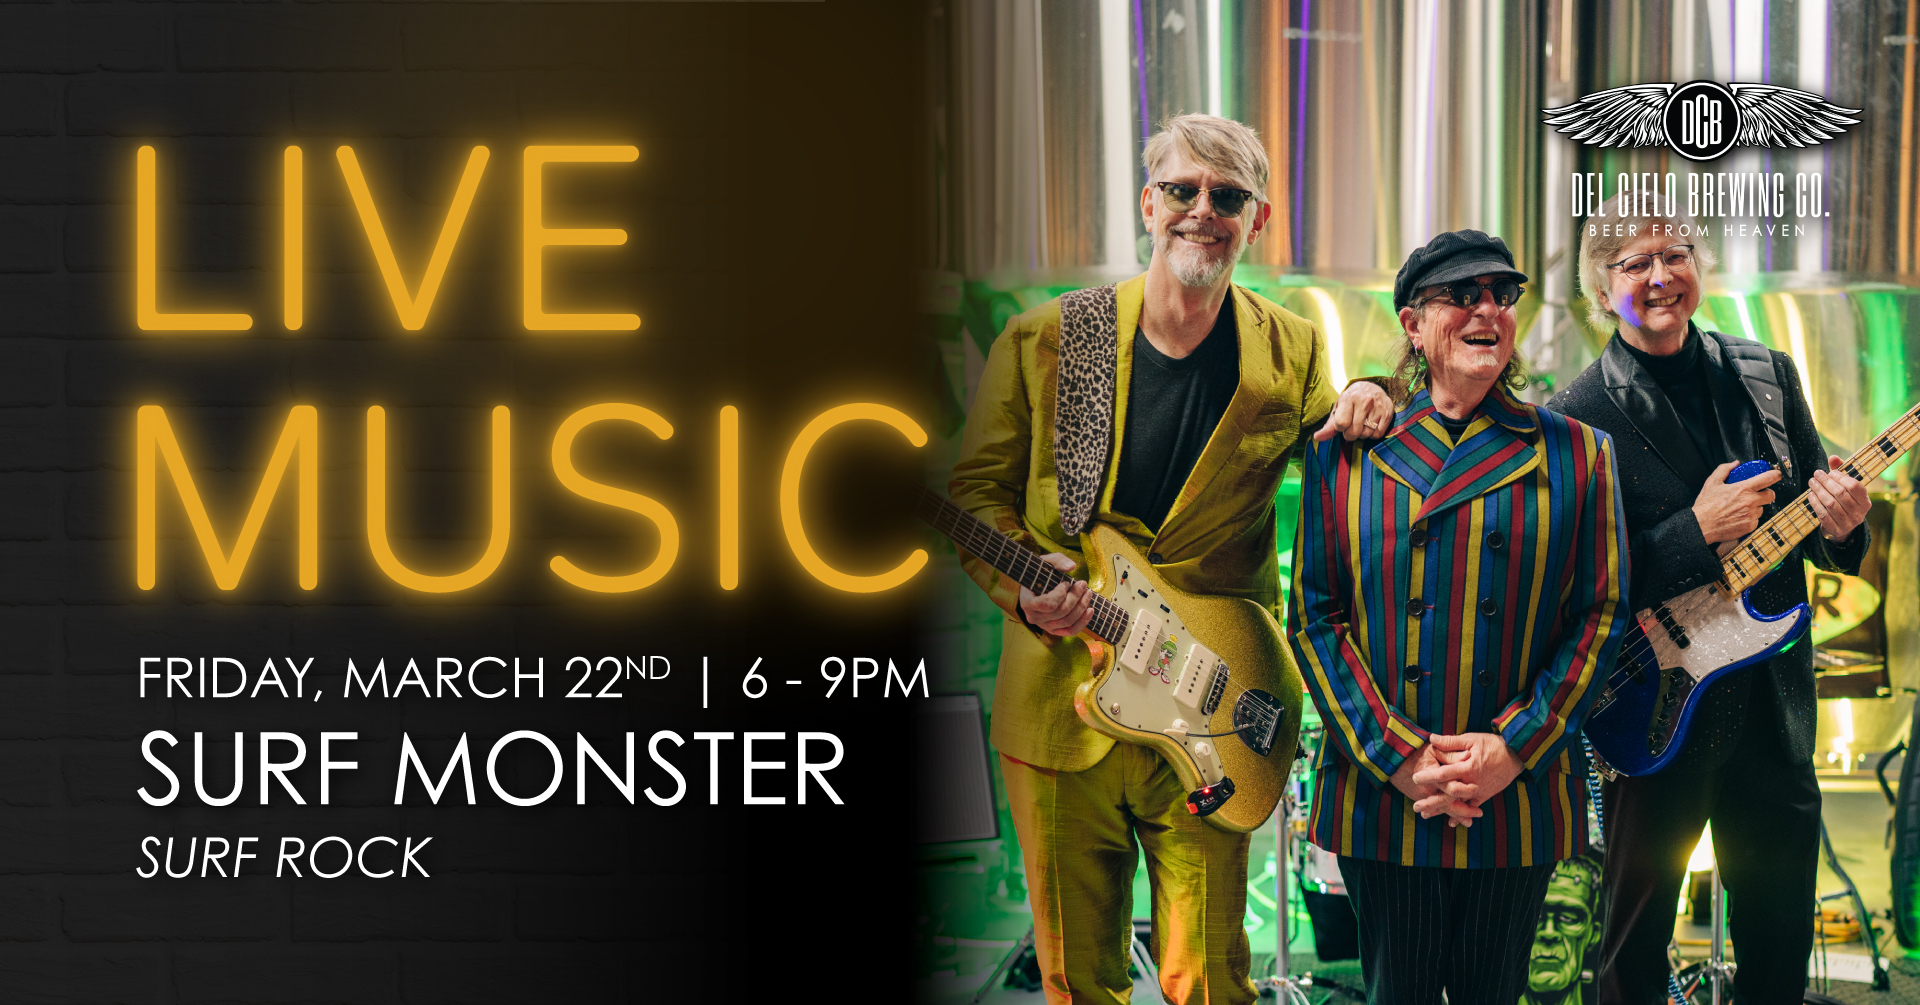 Surf Monster live music march 22nd